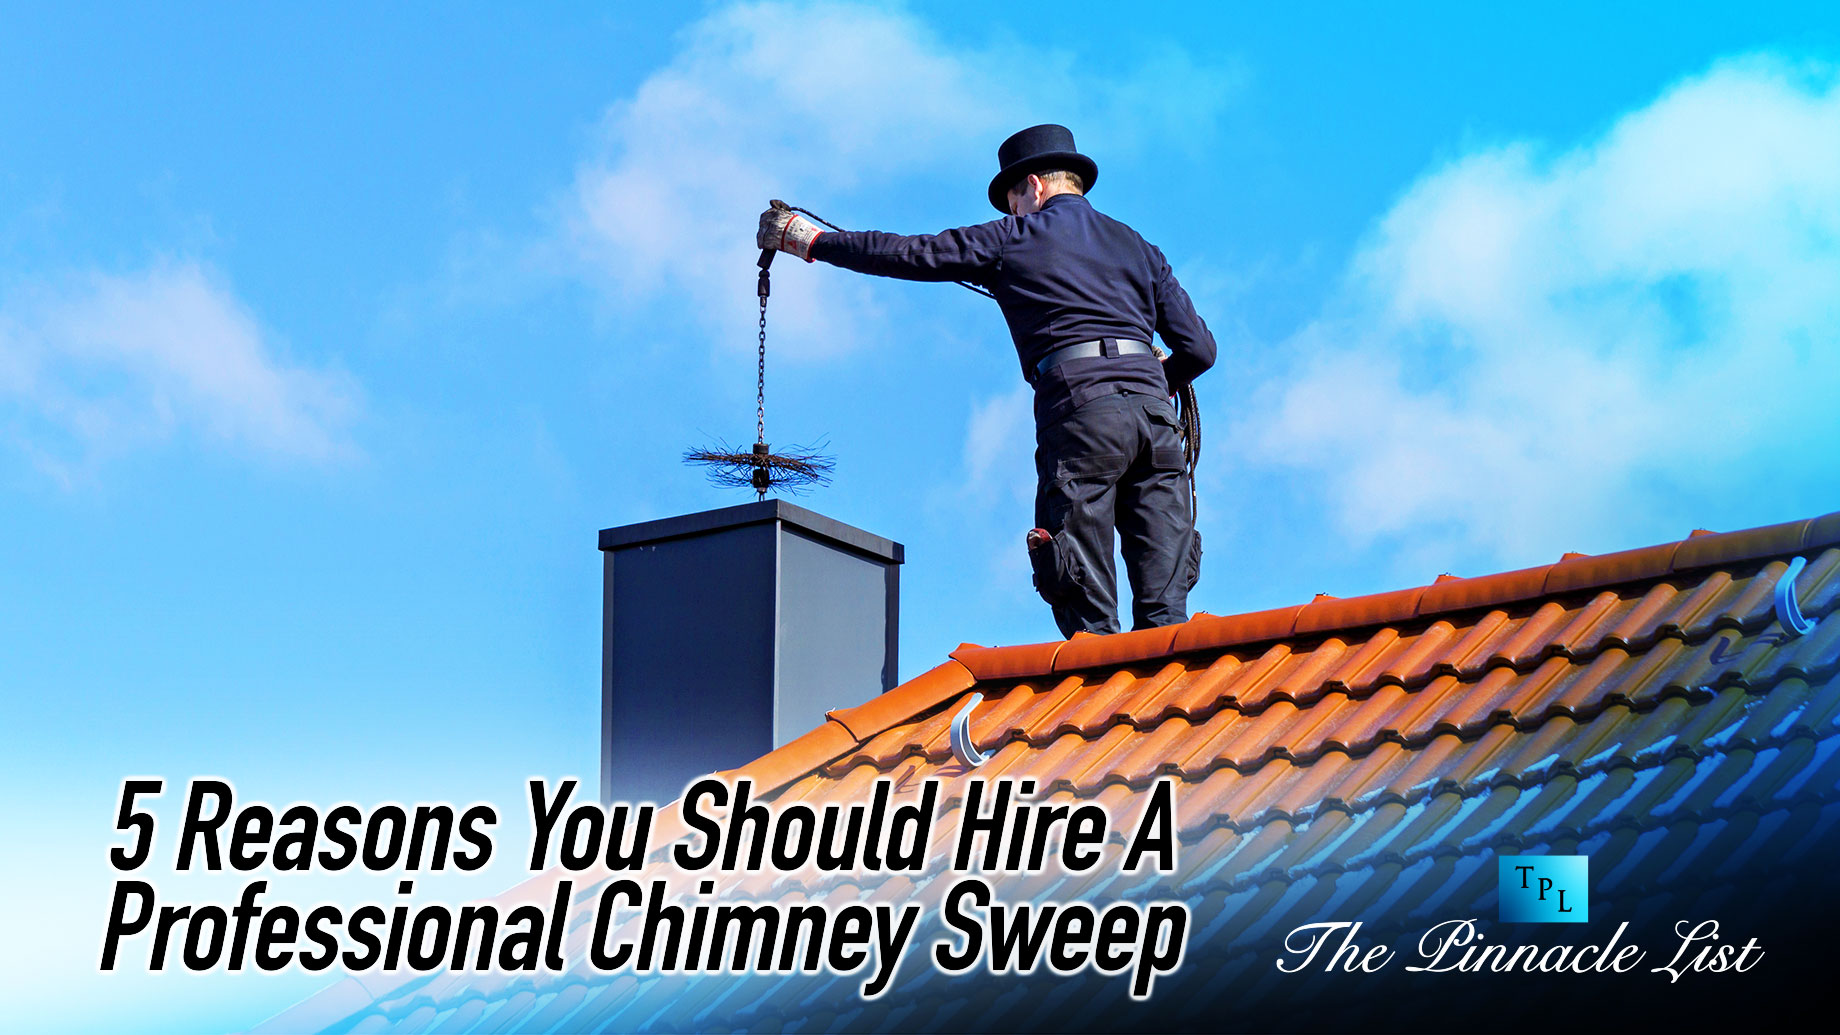 5 Reasons You Should Hire A Professional Chimney Sweep